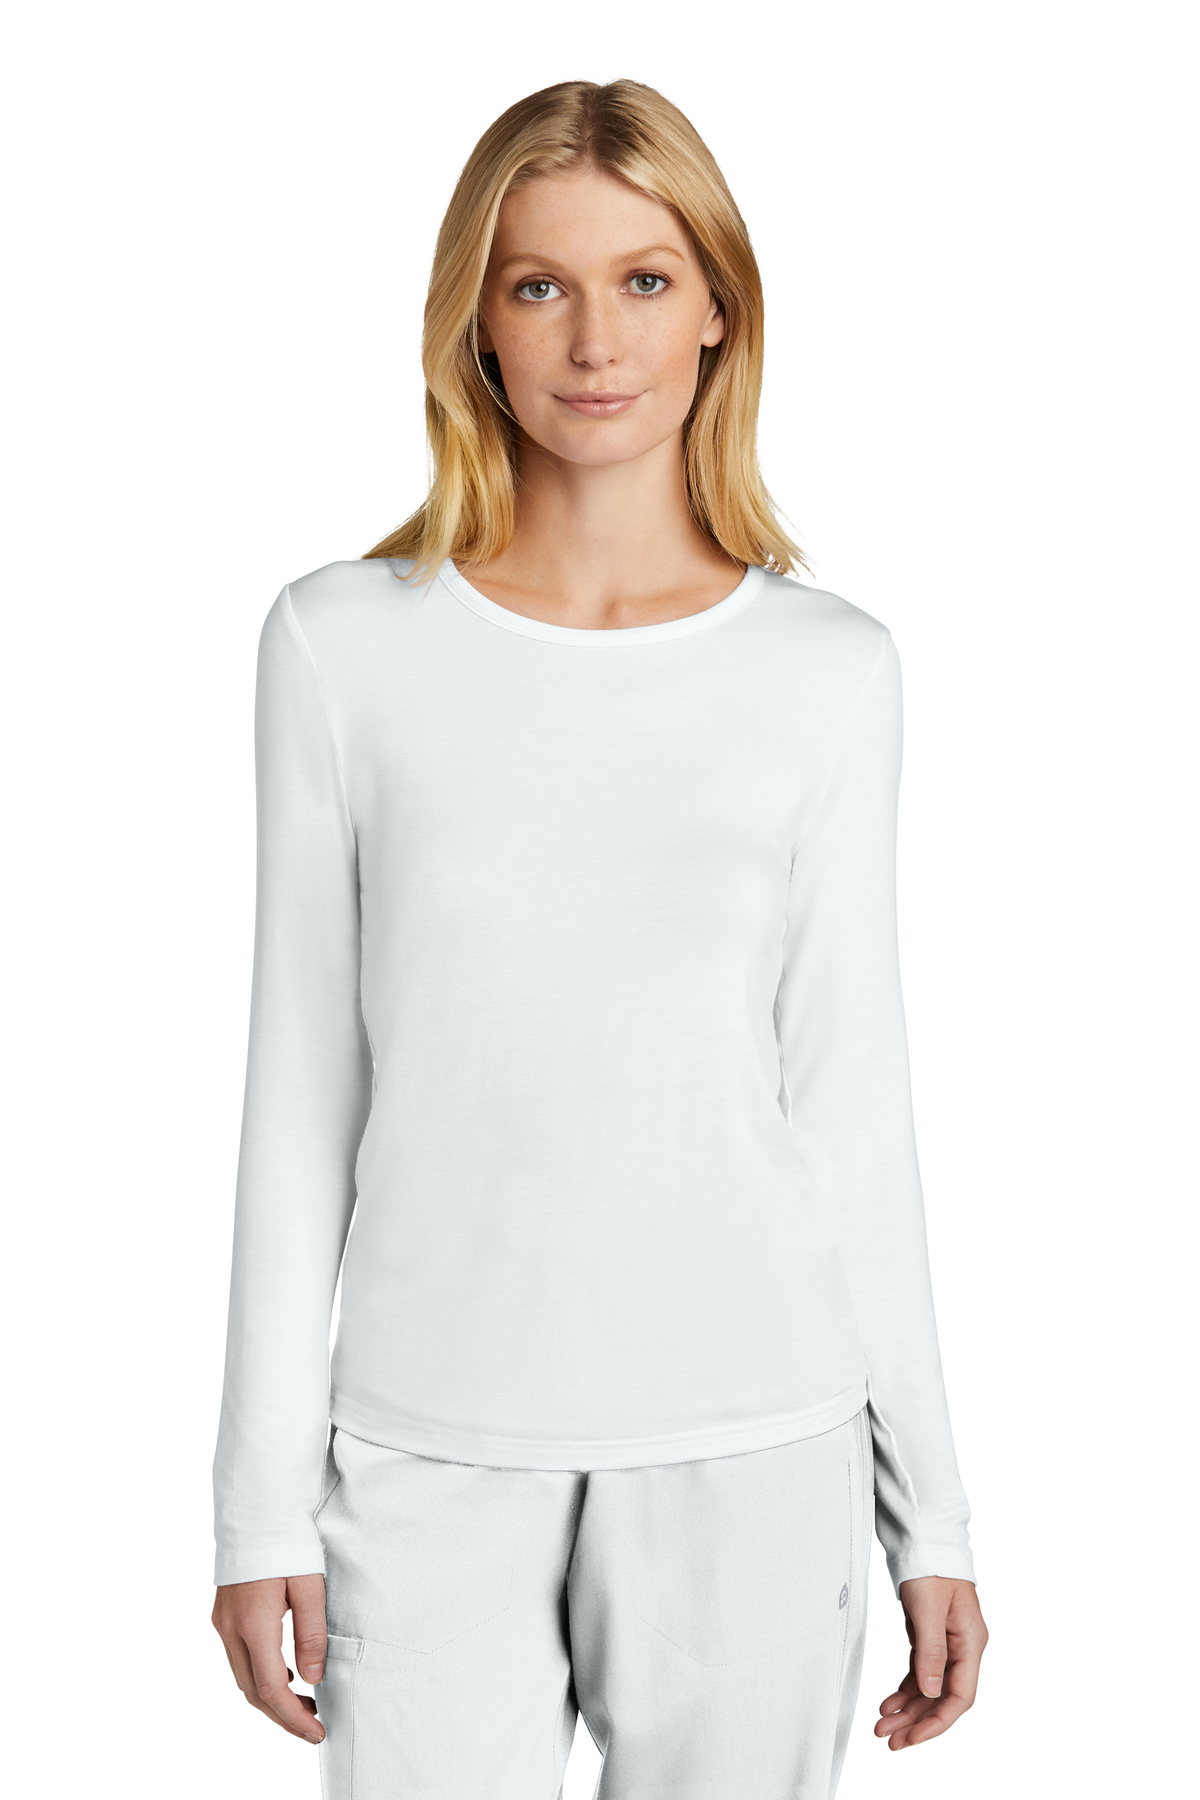 Wink Women’s Long Sleeve Layer Tee | Product | Company Casuals